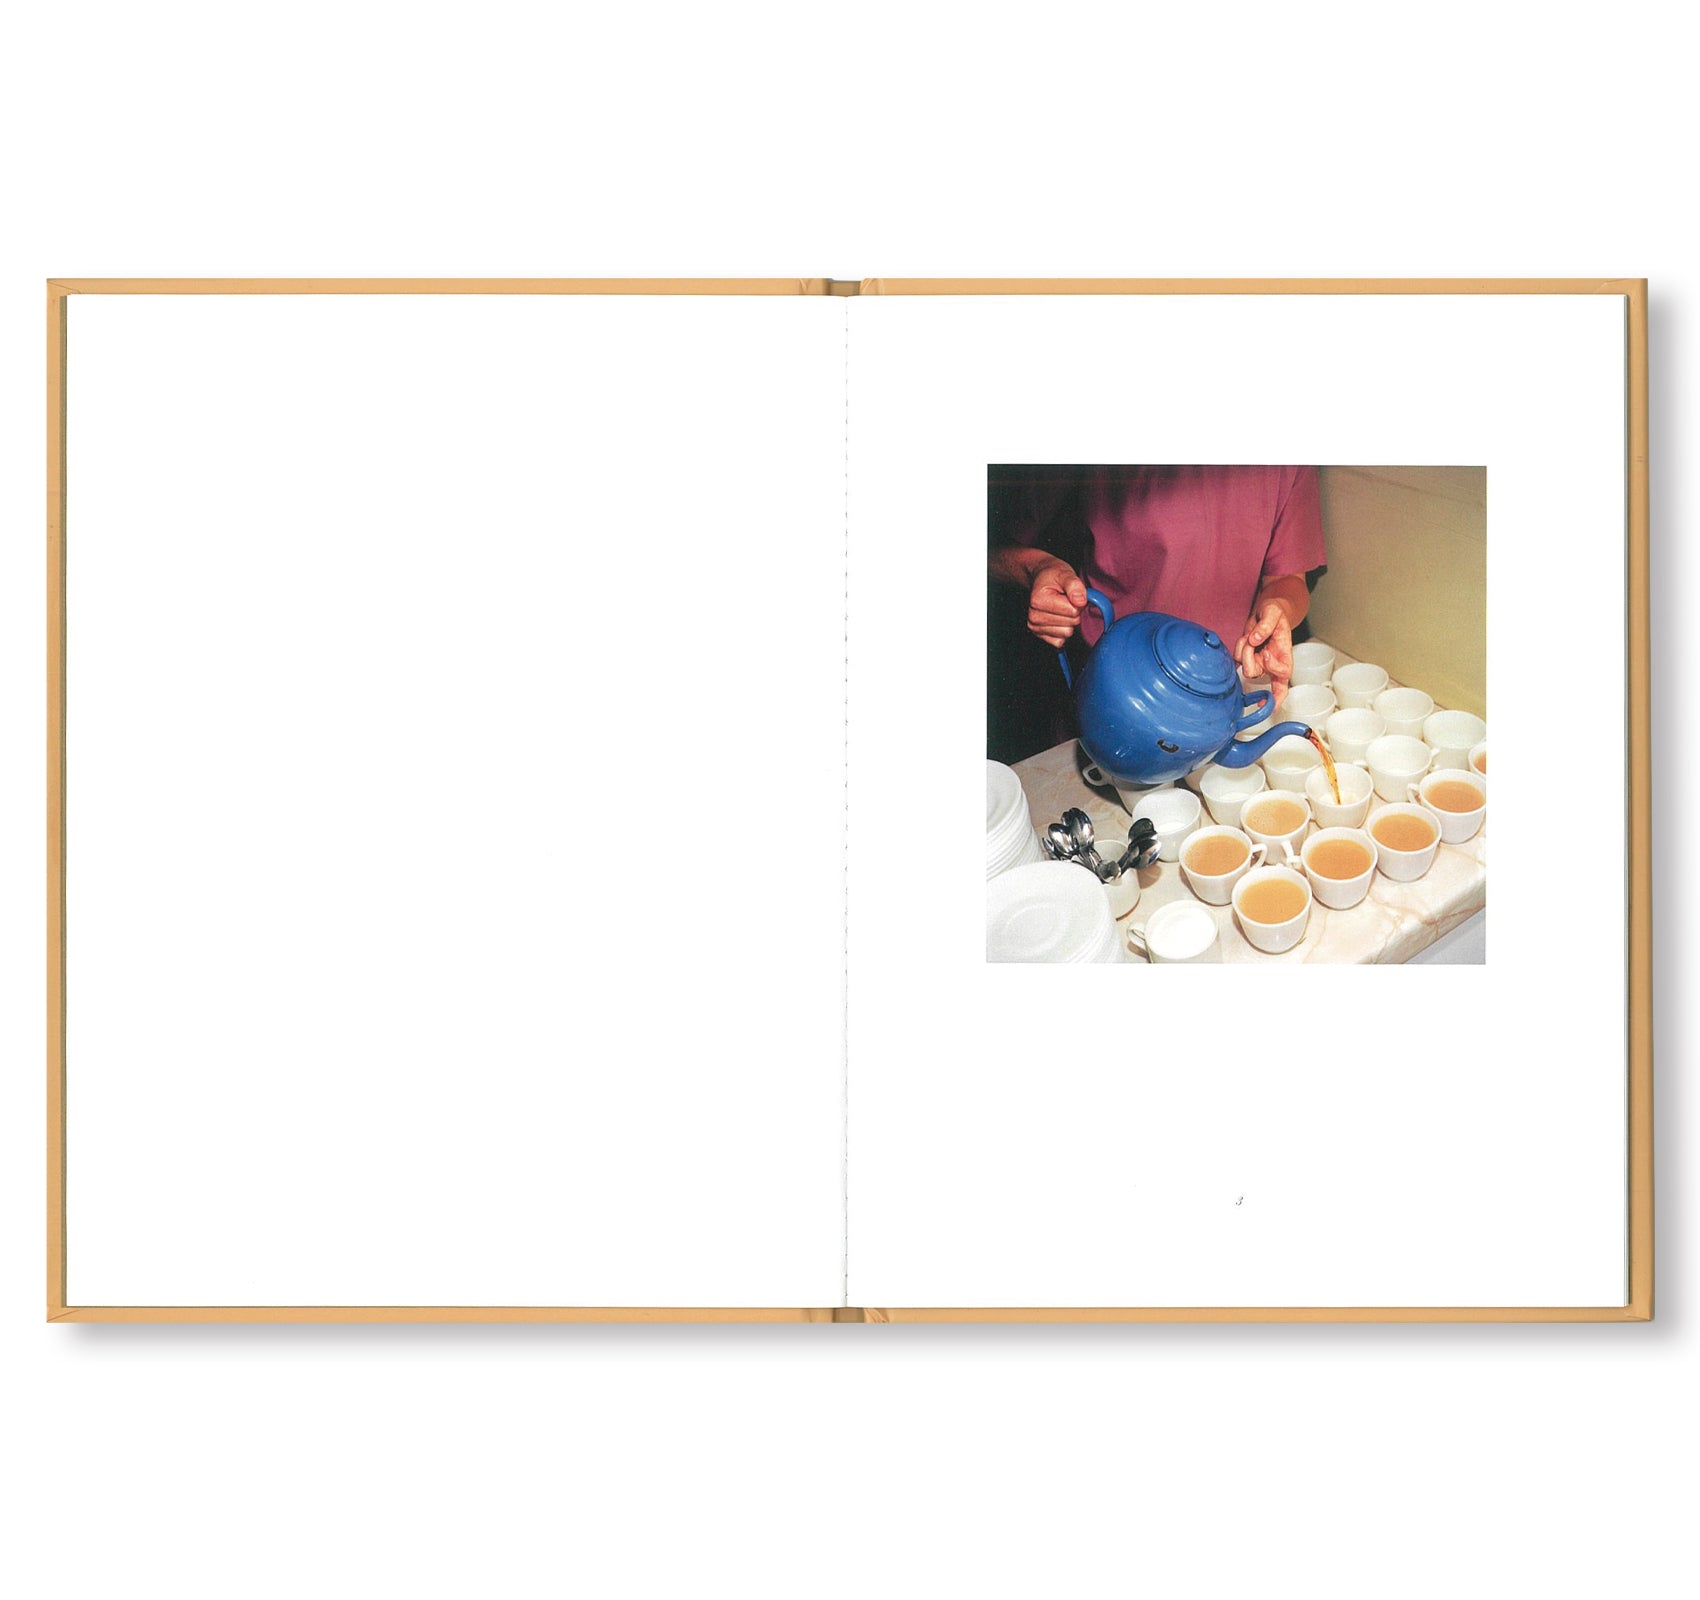 ONE PICTURE BOOK #74: 7 CUPS OF TEA by Martin Parr